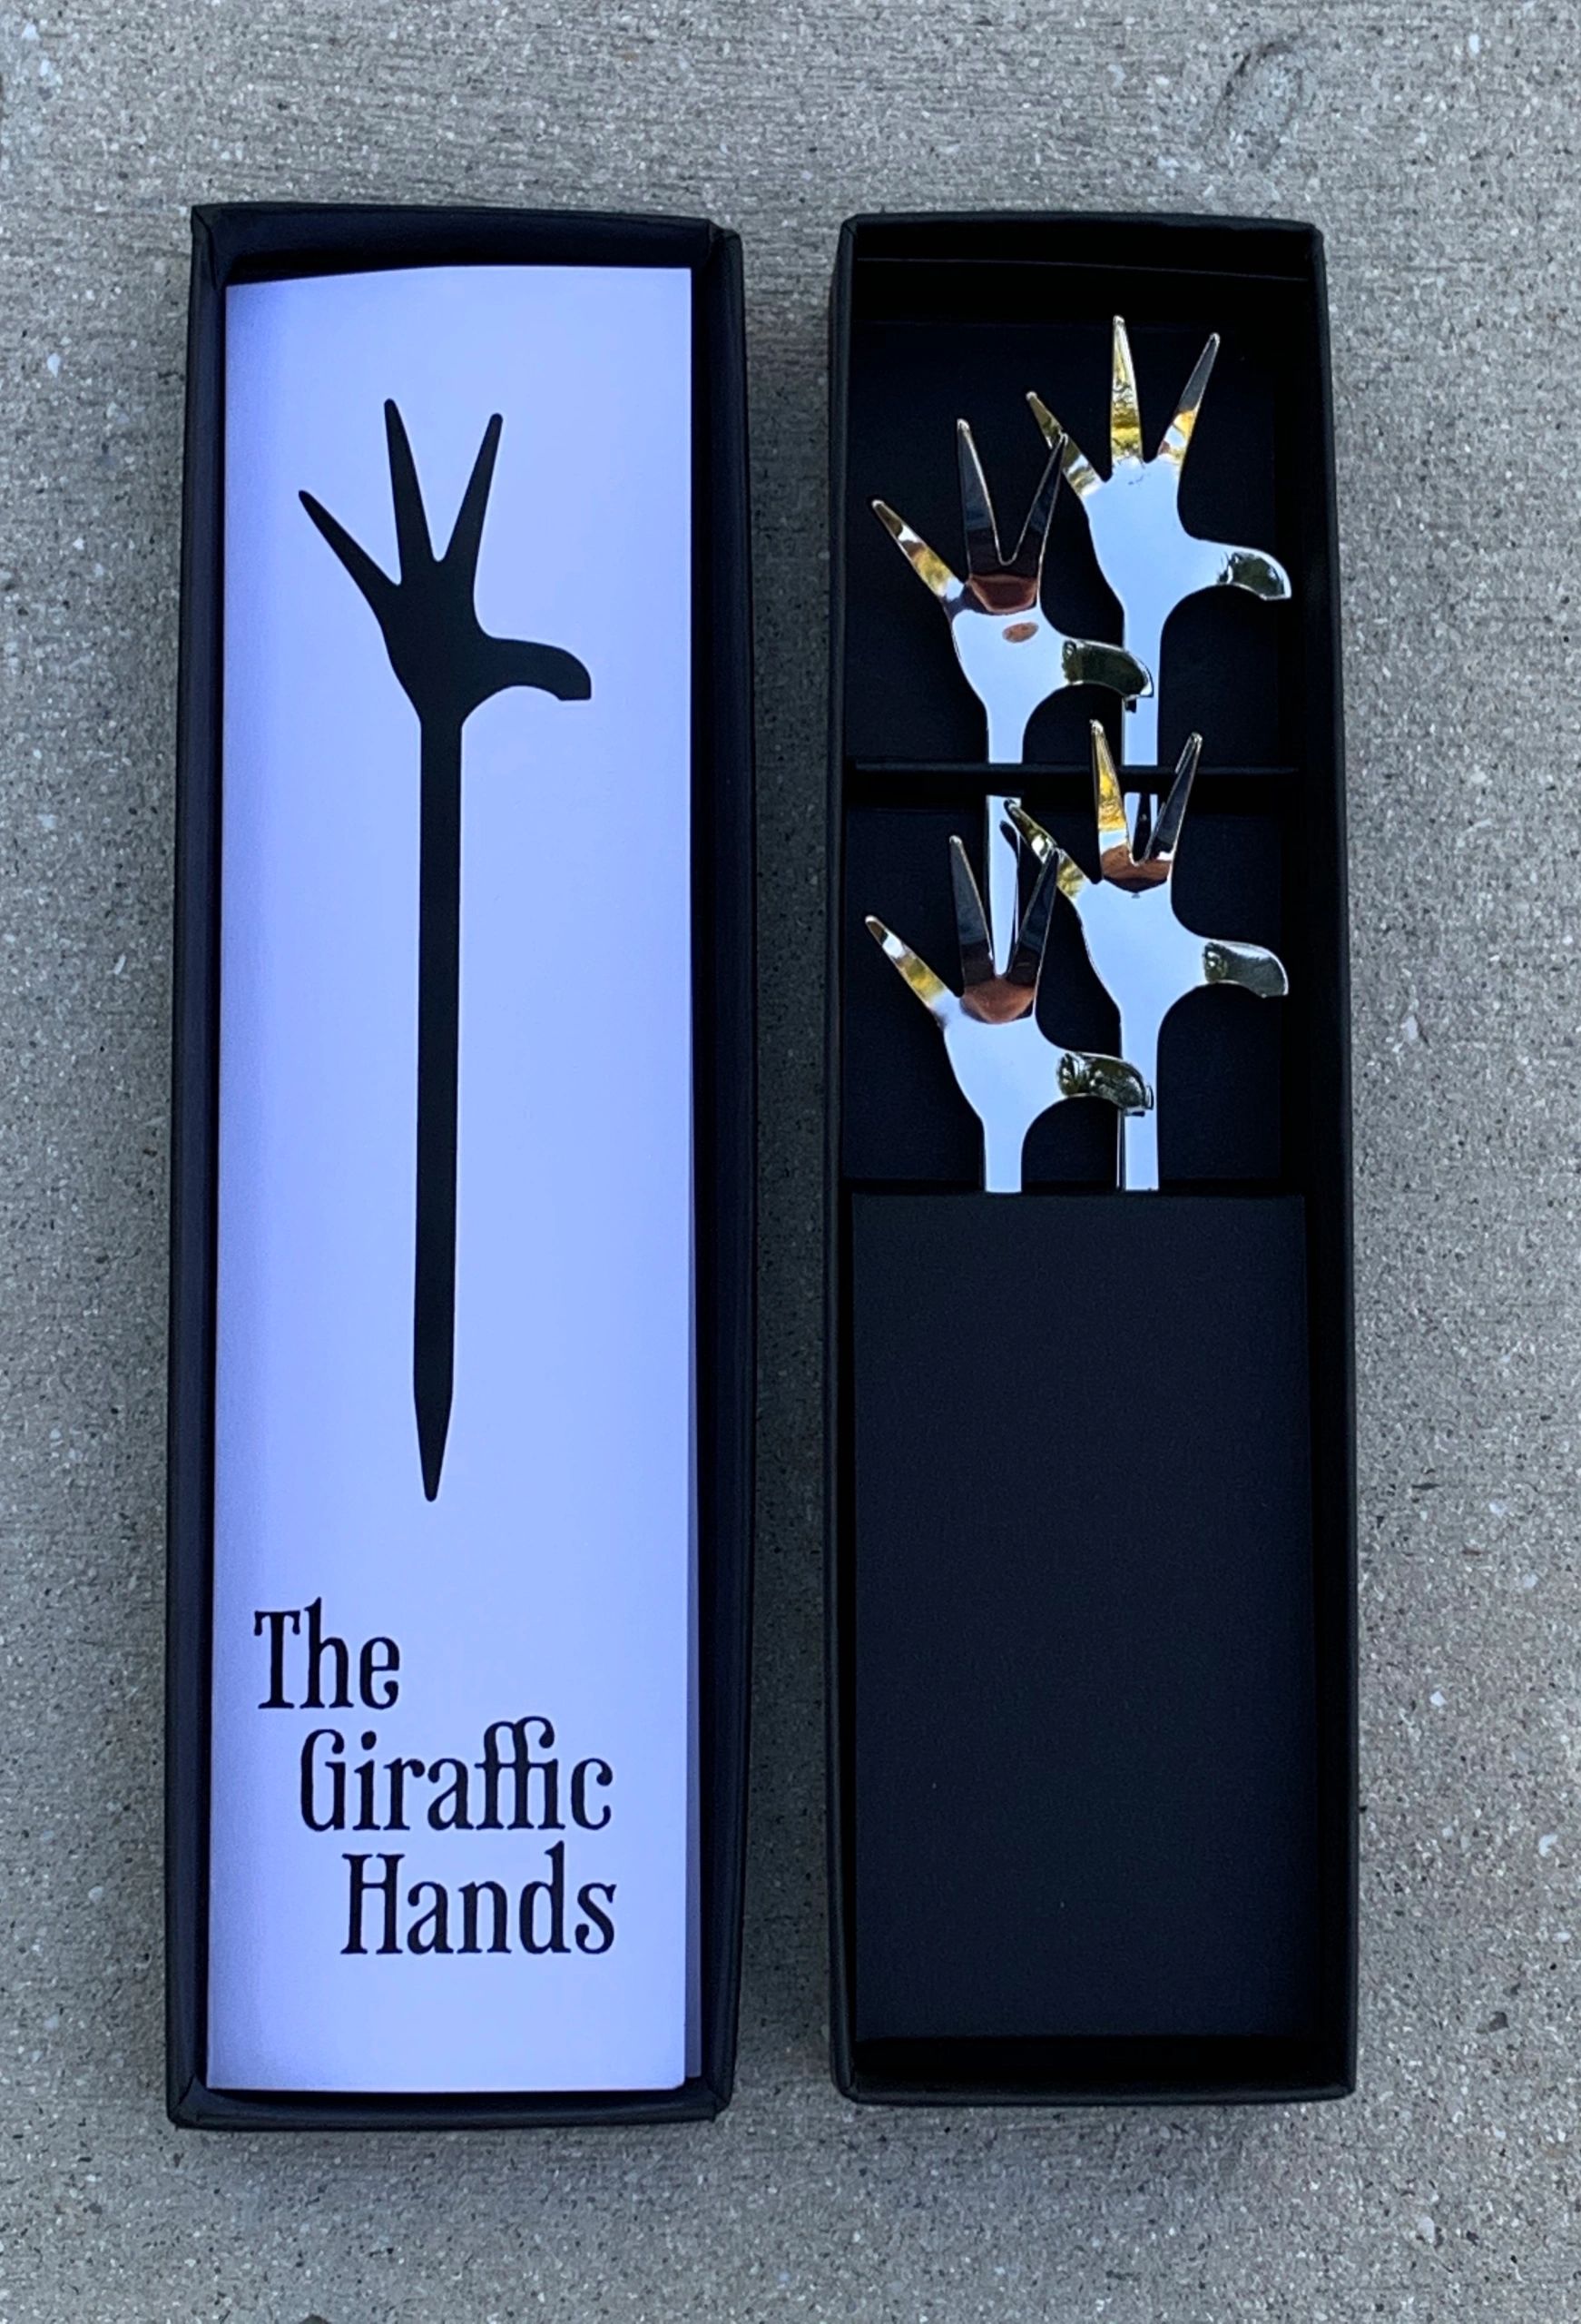 The Giraffic Hands cocktail skewers are like no other. Their mirror image finish, raises the level o